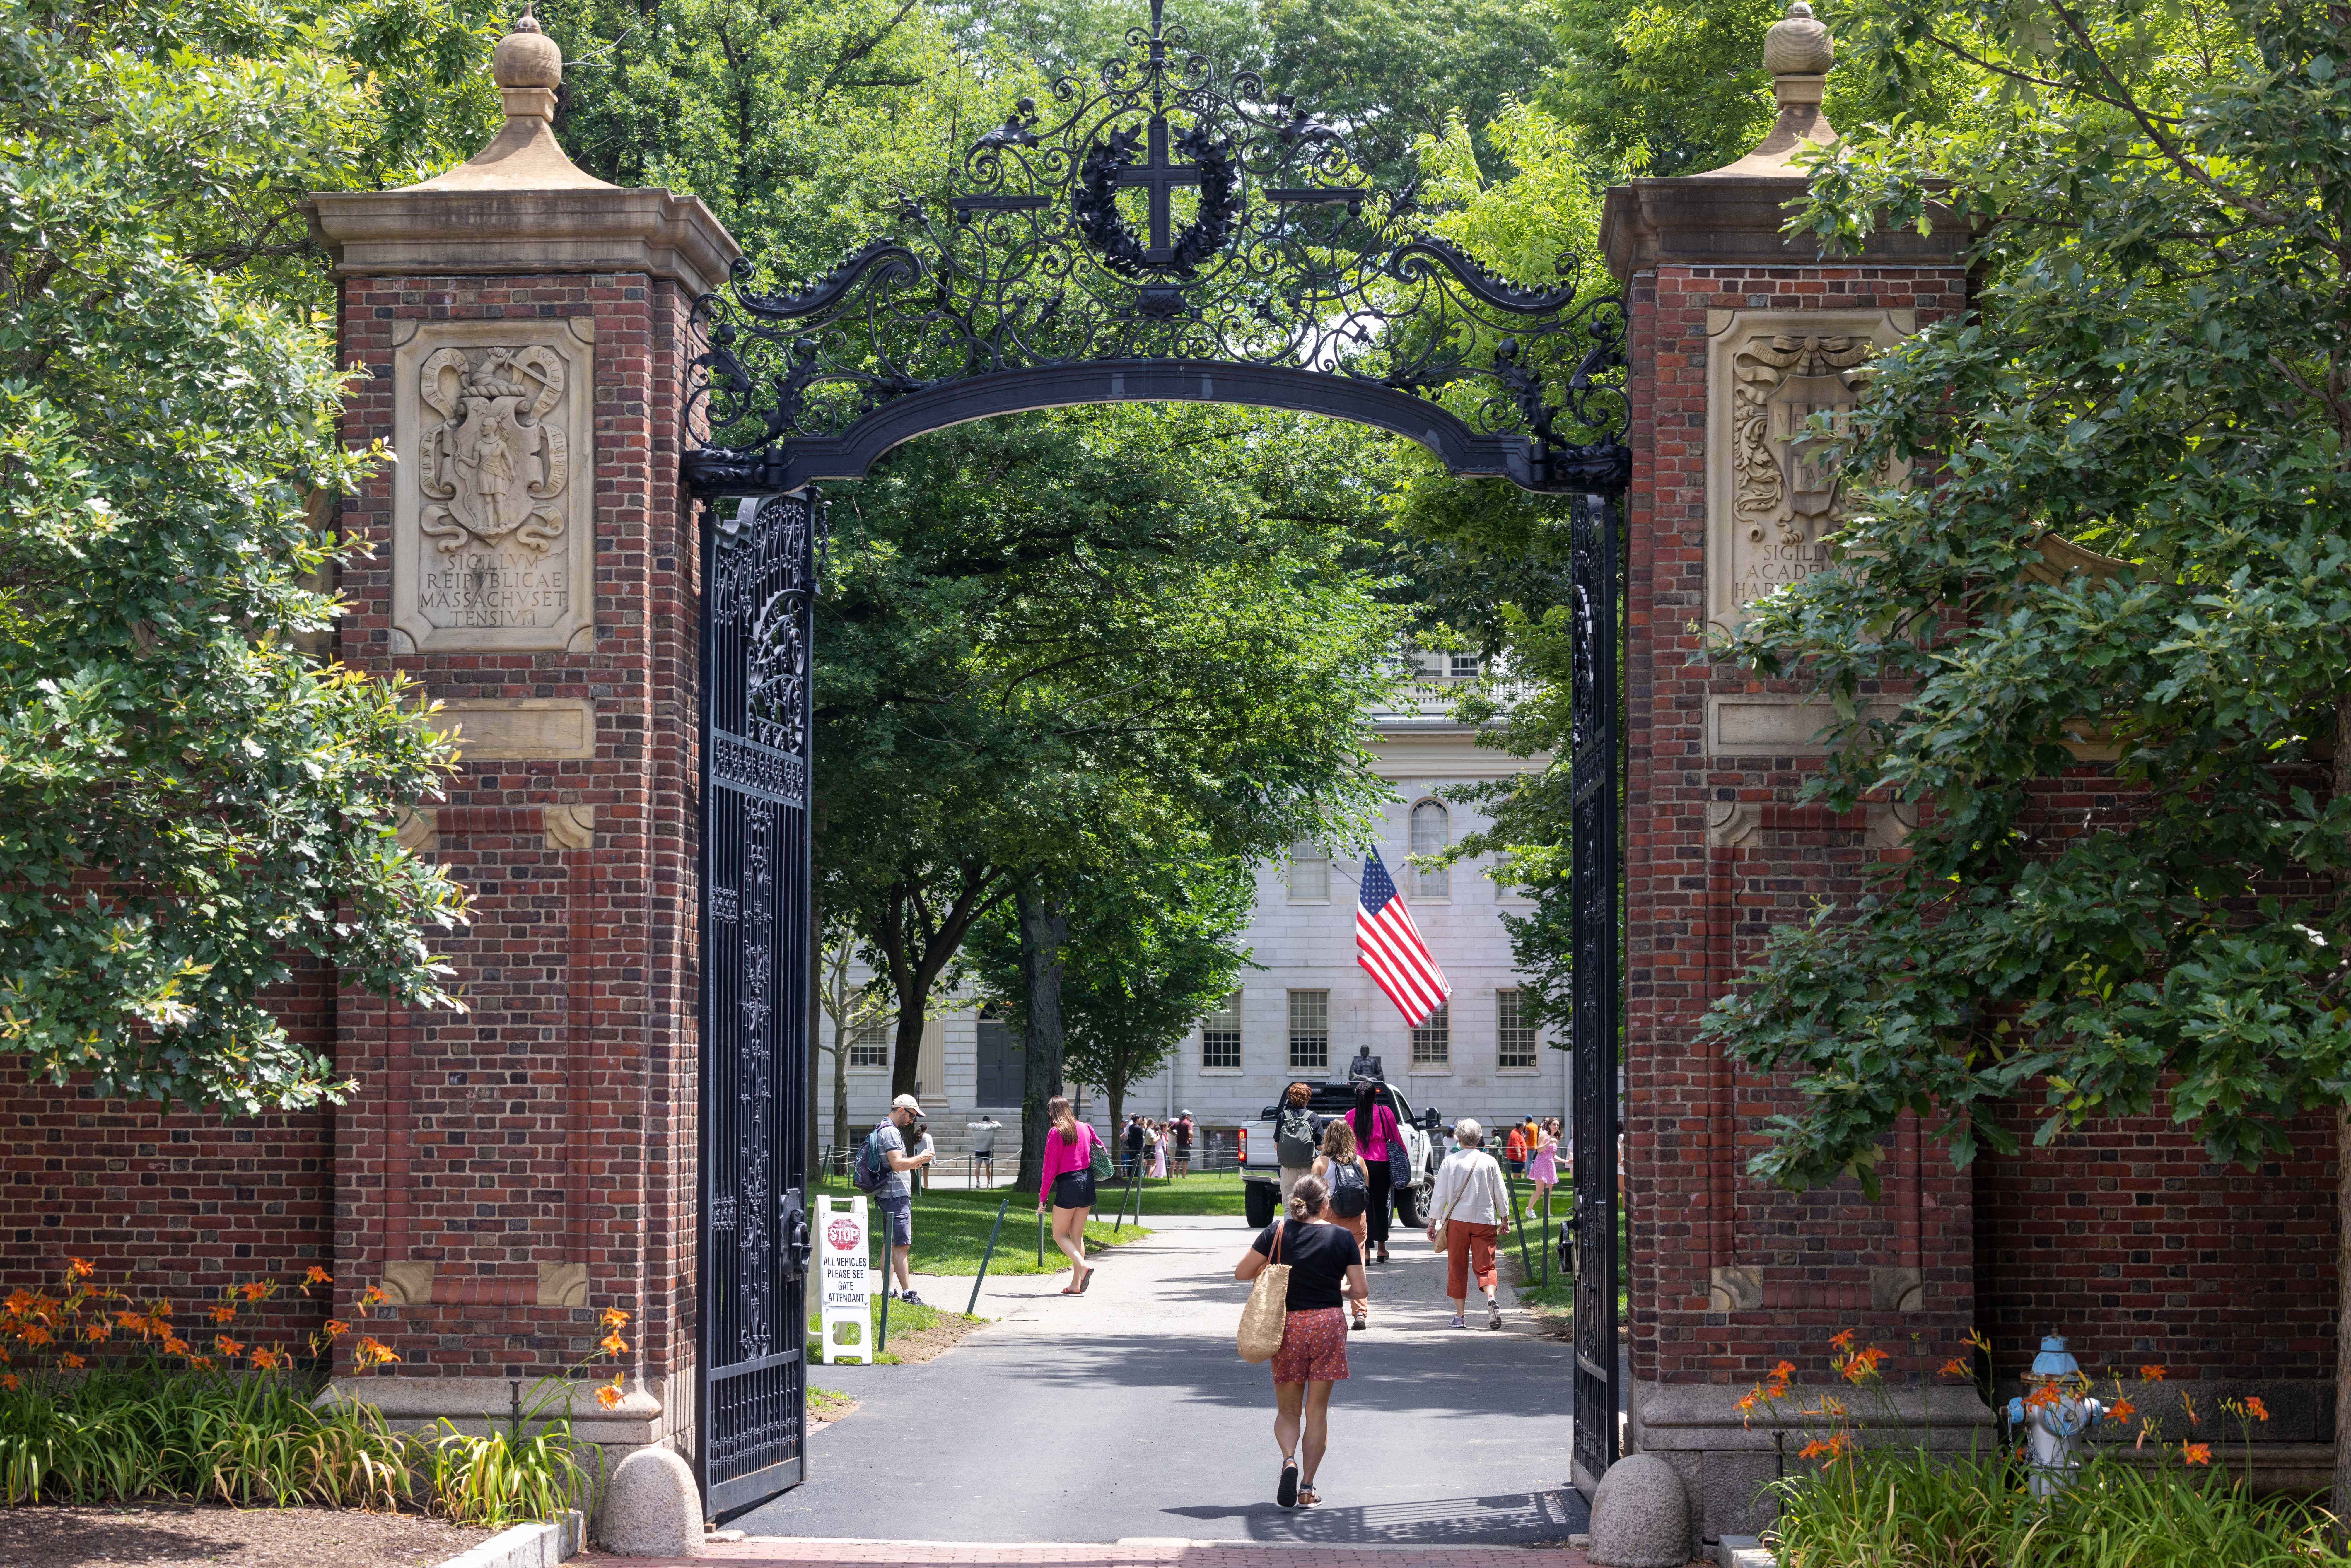 CAMBRIDGE, MASSACHUSETTS - JUNE 29: People walk through the gate on Harvard Yard at the Harvard University campus on June 29, 2023 in Cambridge, Massachusetts. The U.S. Supreme Court ruled that race-conscious admission policies used by Harvard and the University of North Carolina violate the Constitution, bringing an end to affirmative action in higher education. (Photo by Scott Eisen/Getty Images)